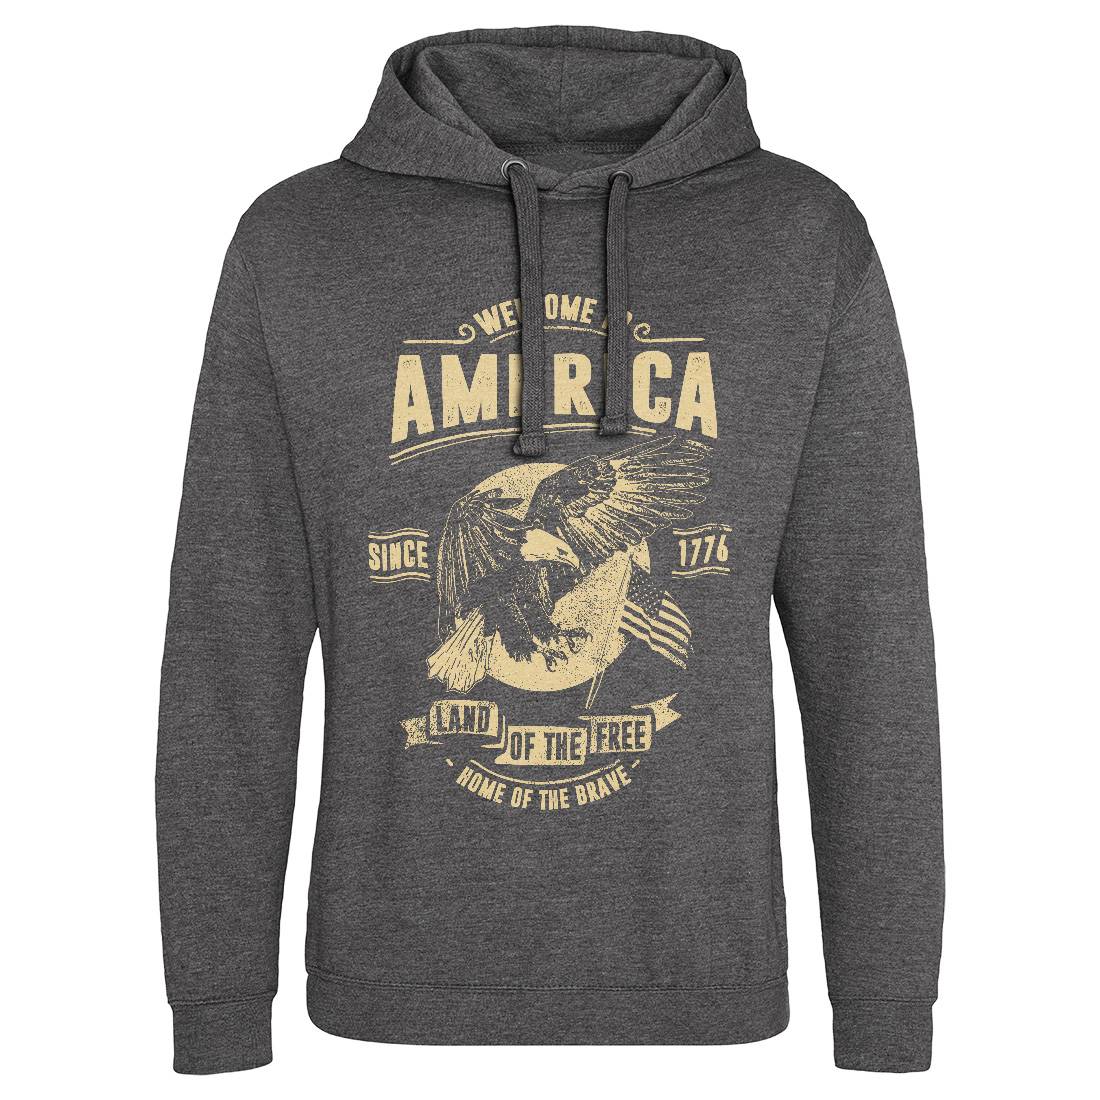 Welcome To America Mens Hoodie Without Pocket American C994